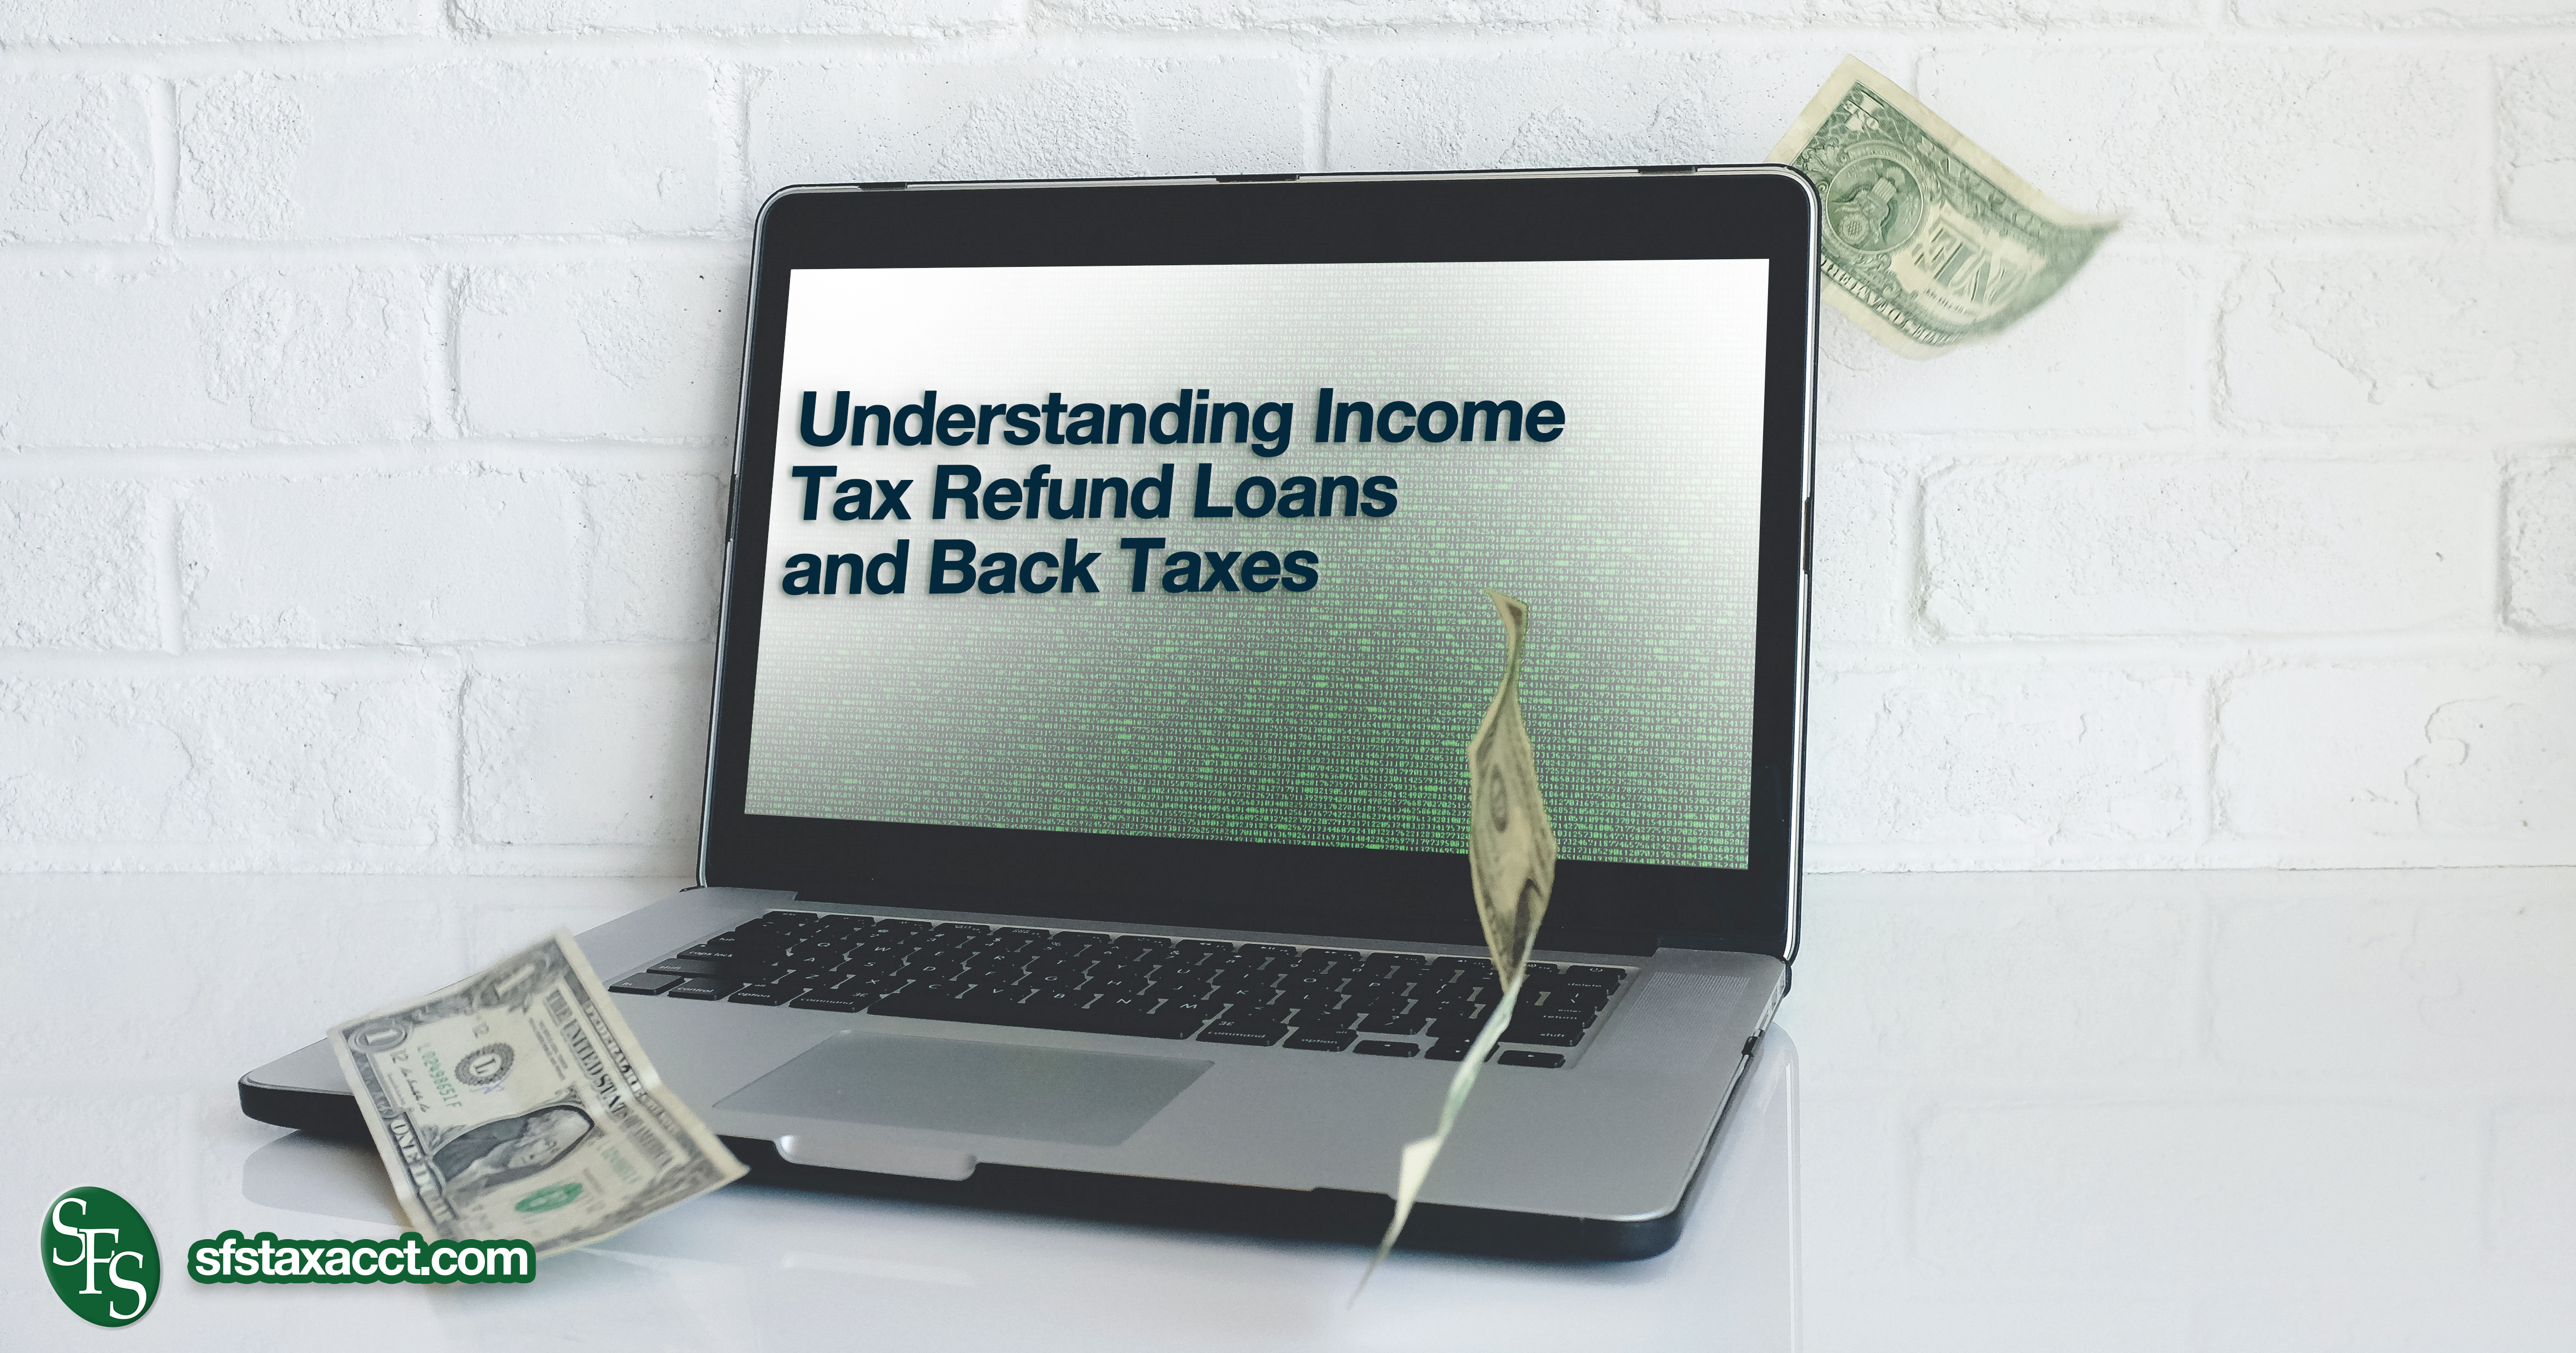 Understanding Income Tax Refund Loans and Back Taxes - SFS Tax & Accounting Services4728 x 2484